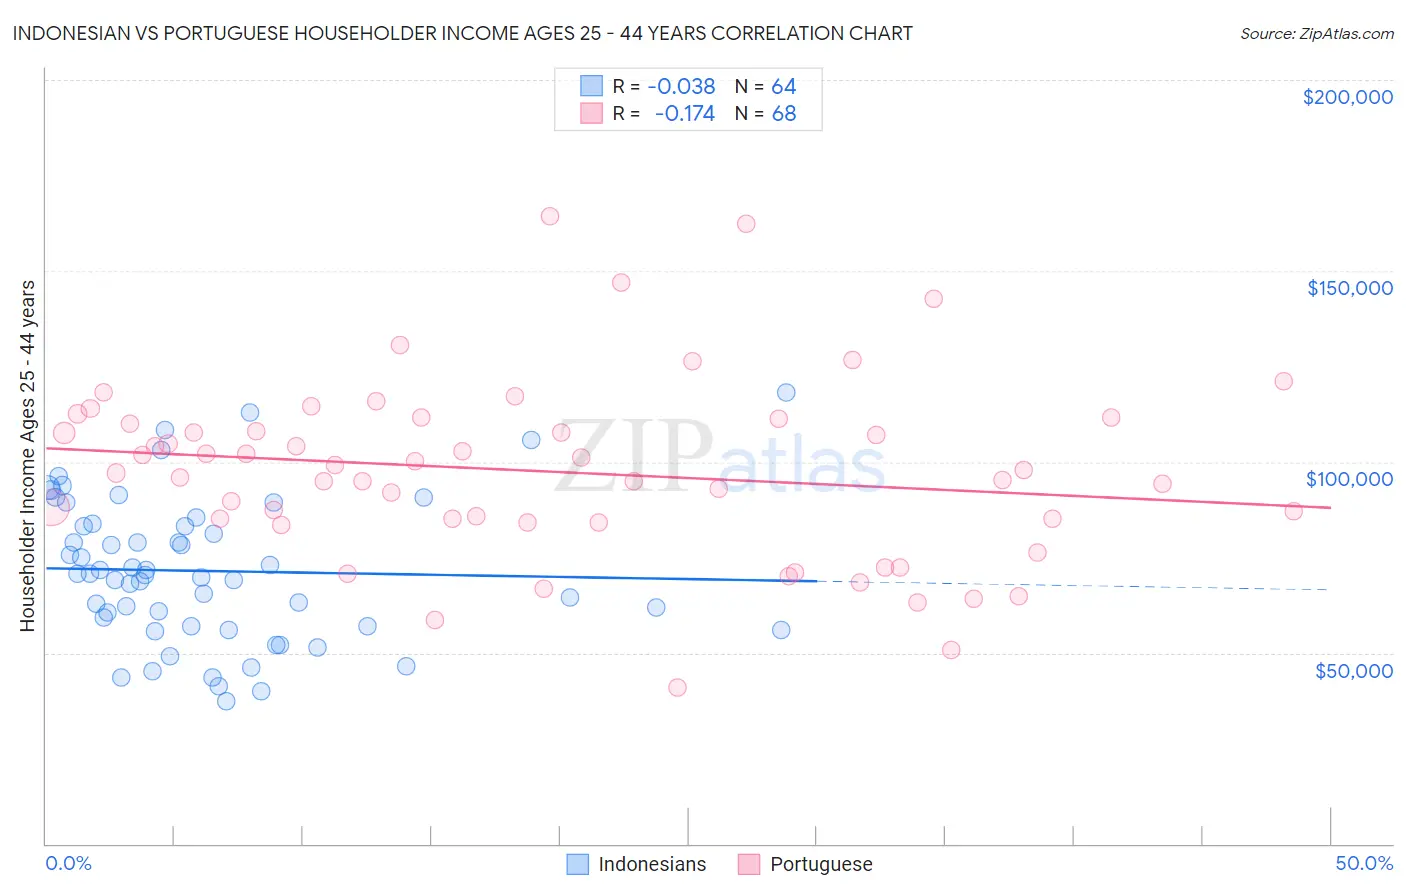 Indonesian vs Portuguese Householder Income Ages 25 - 44 years